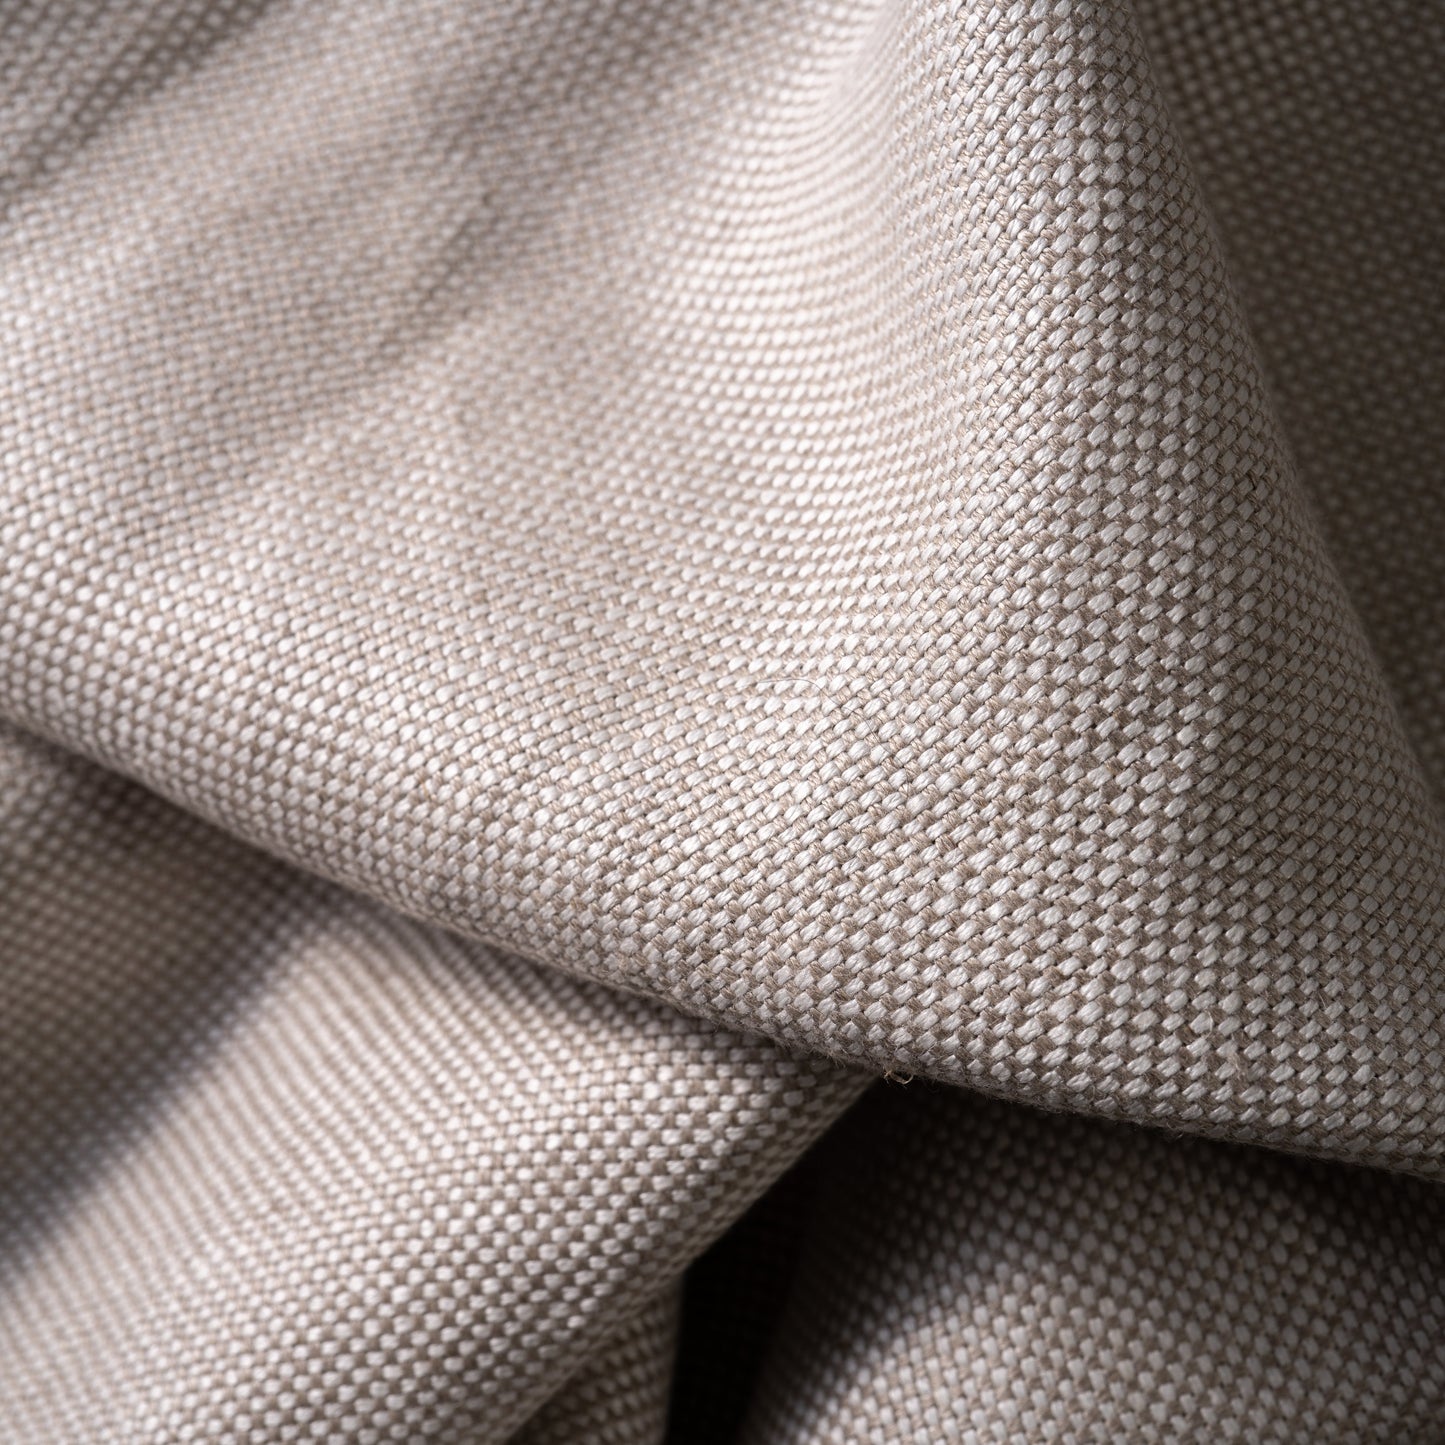 14.5 oz/sq yard 100% Upholstery Weight Linen in Mixed Natural